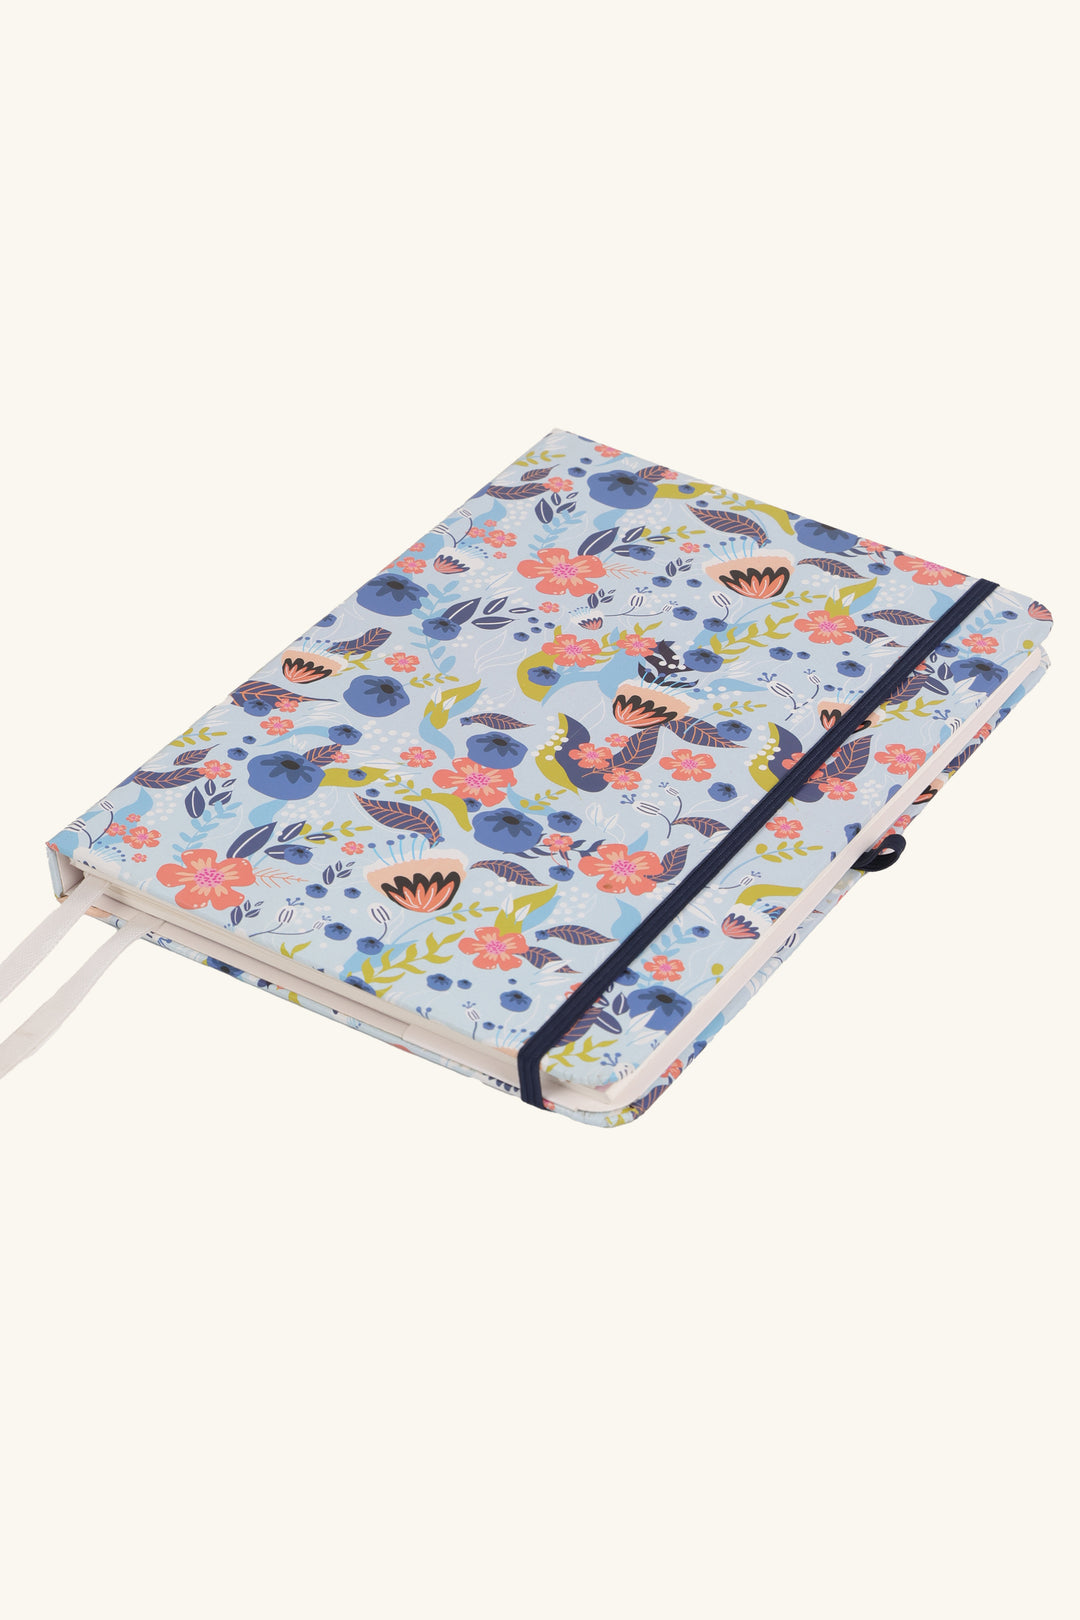 Blue Bloom Duo Journal | Choose Your Softcover Notebooks